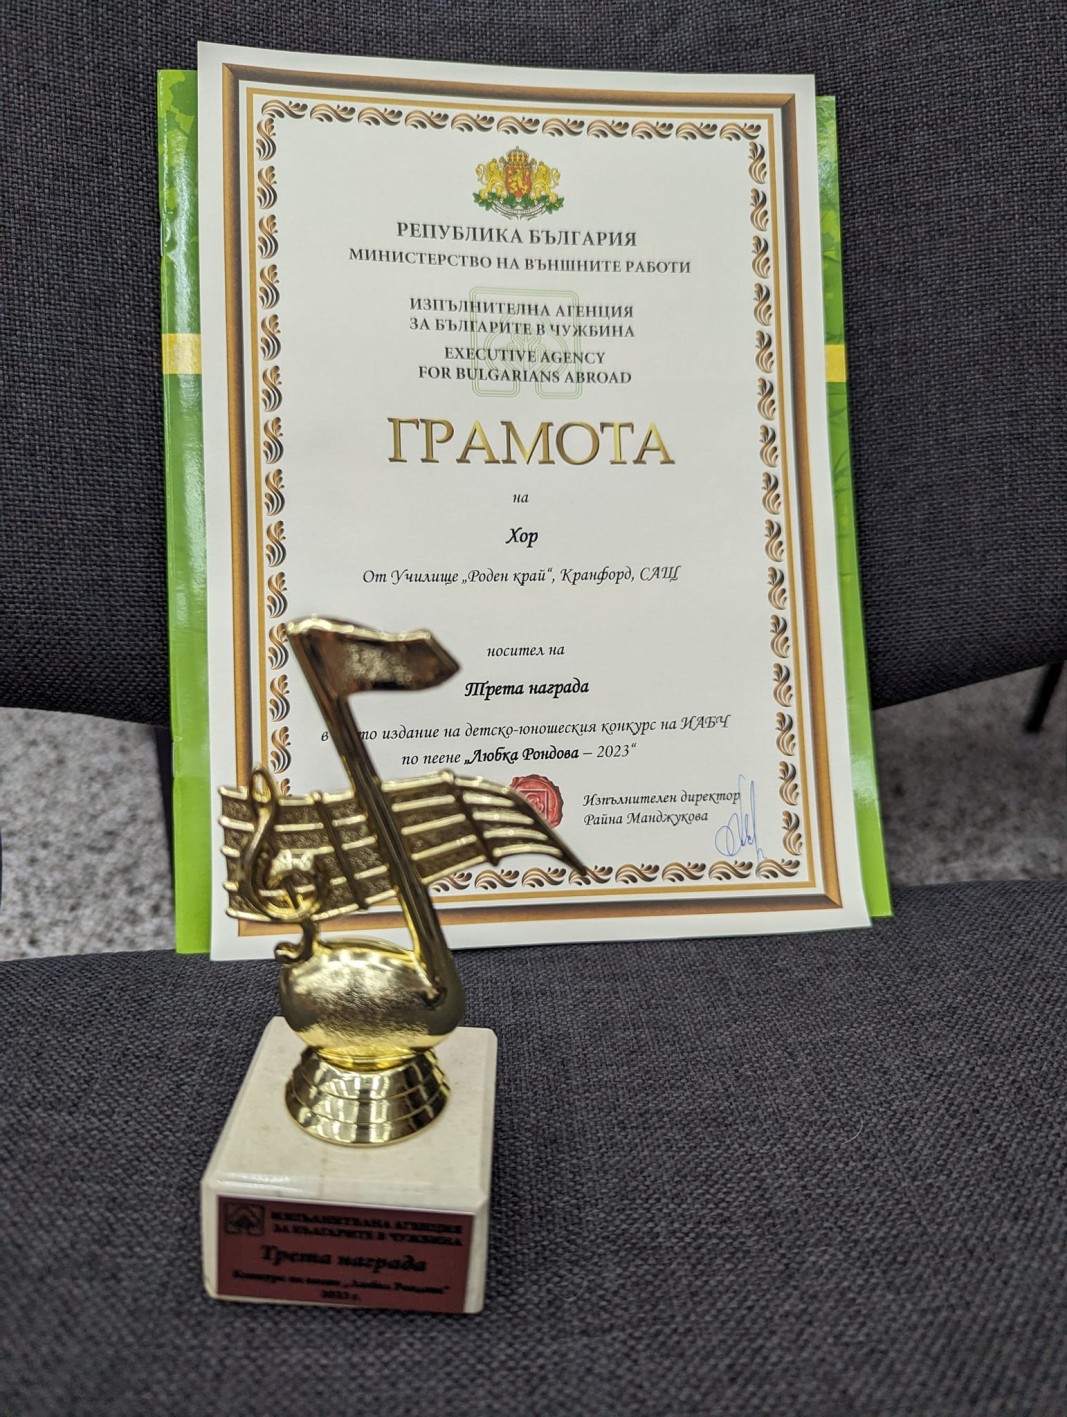 The children from the choir of Roden Krai School earned the 3rd prize at the 2023 Lyubka Rondova Singing Contest